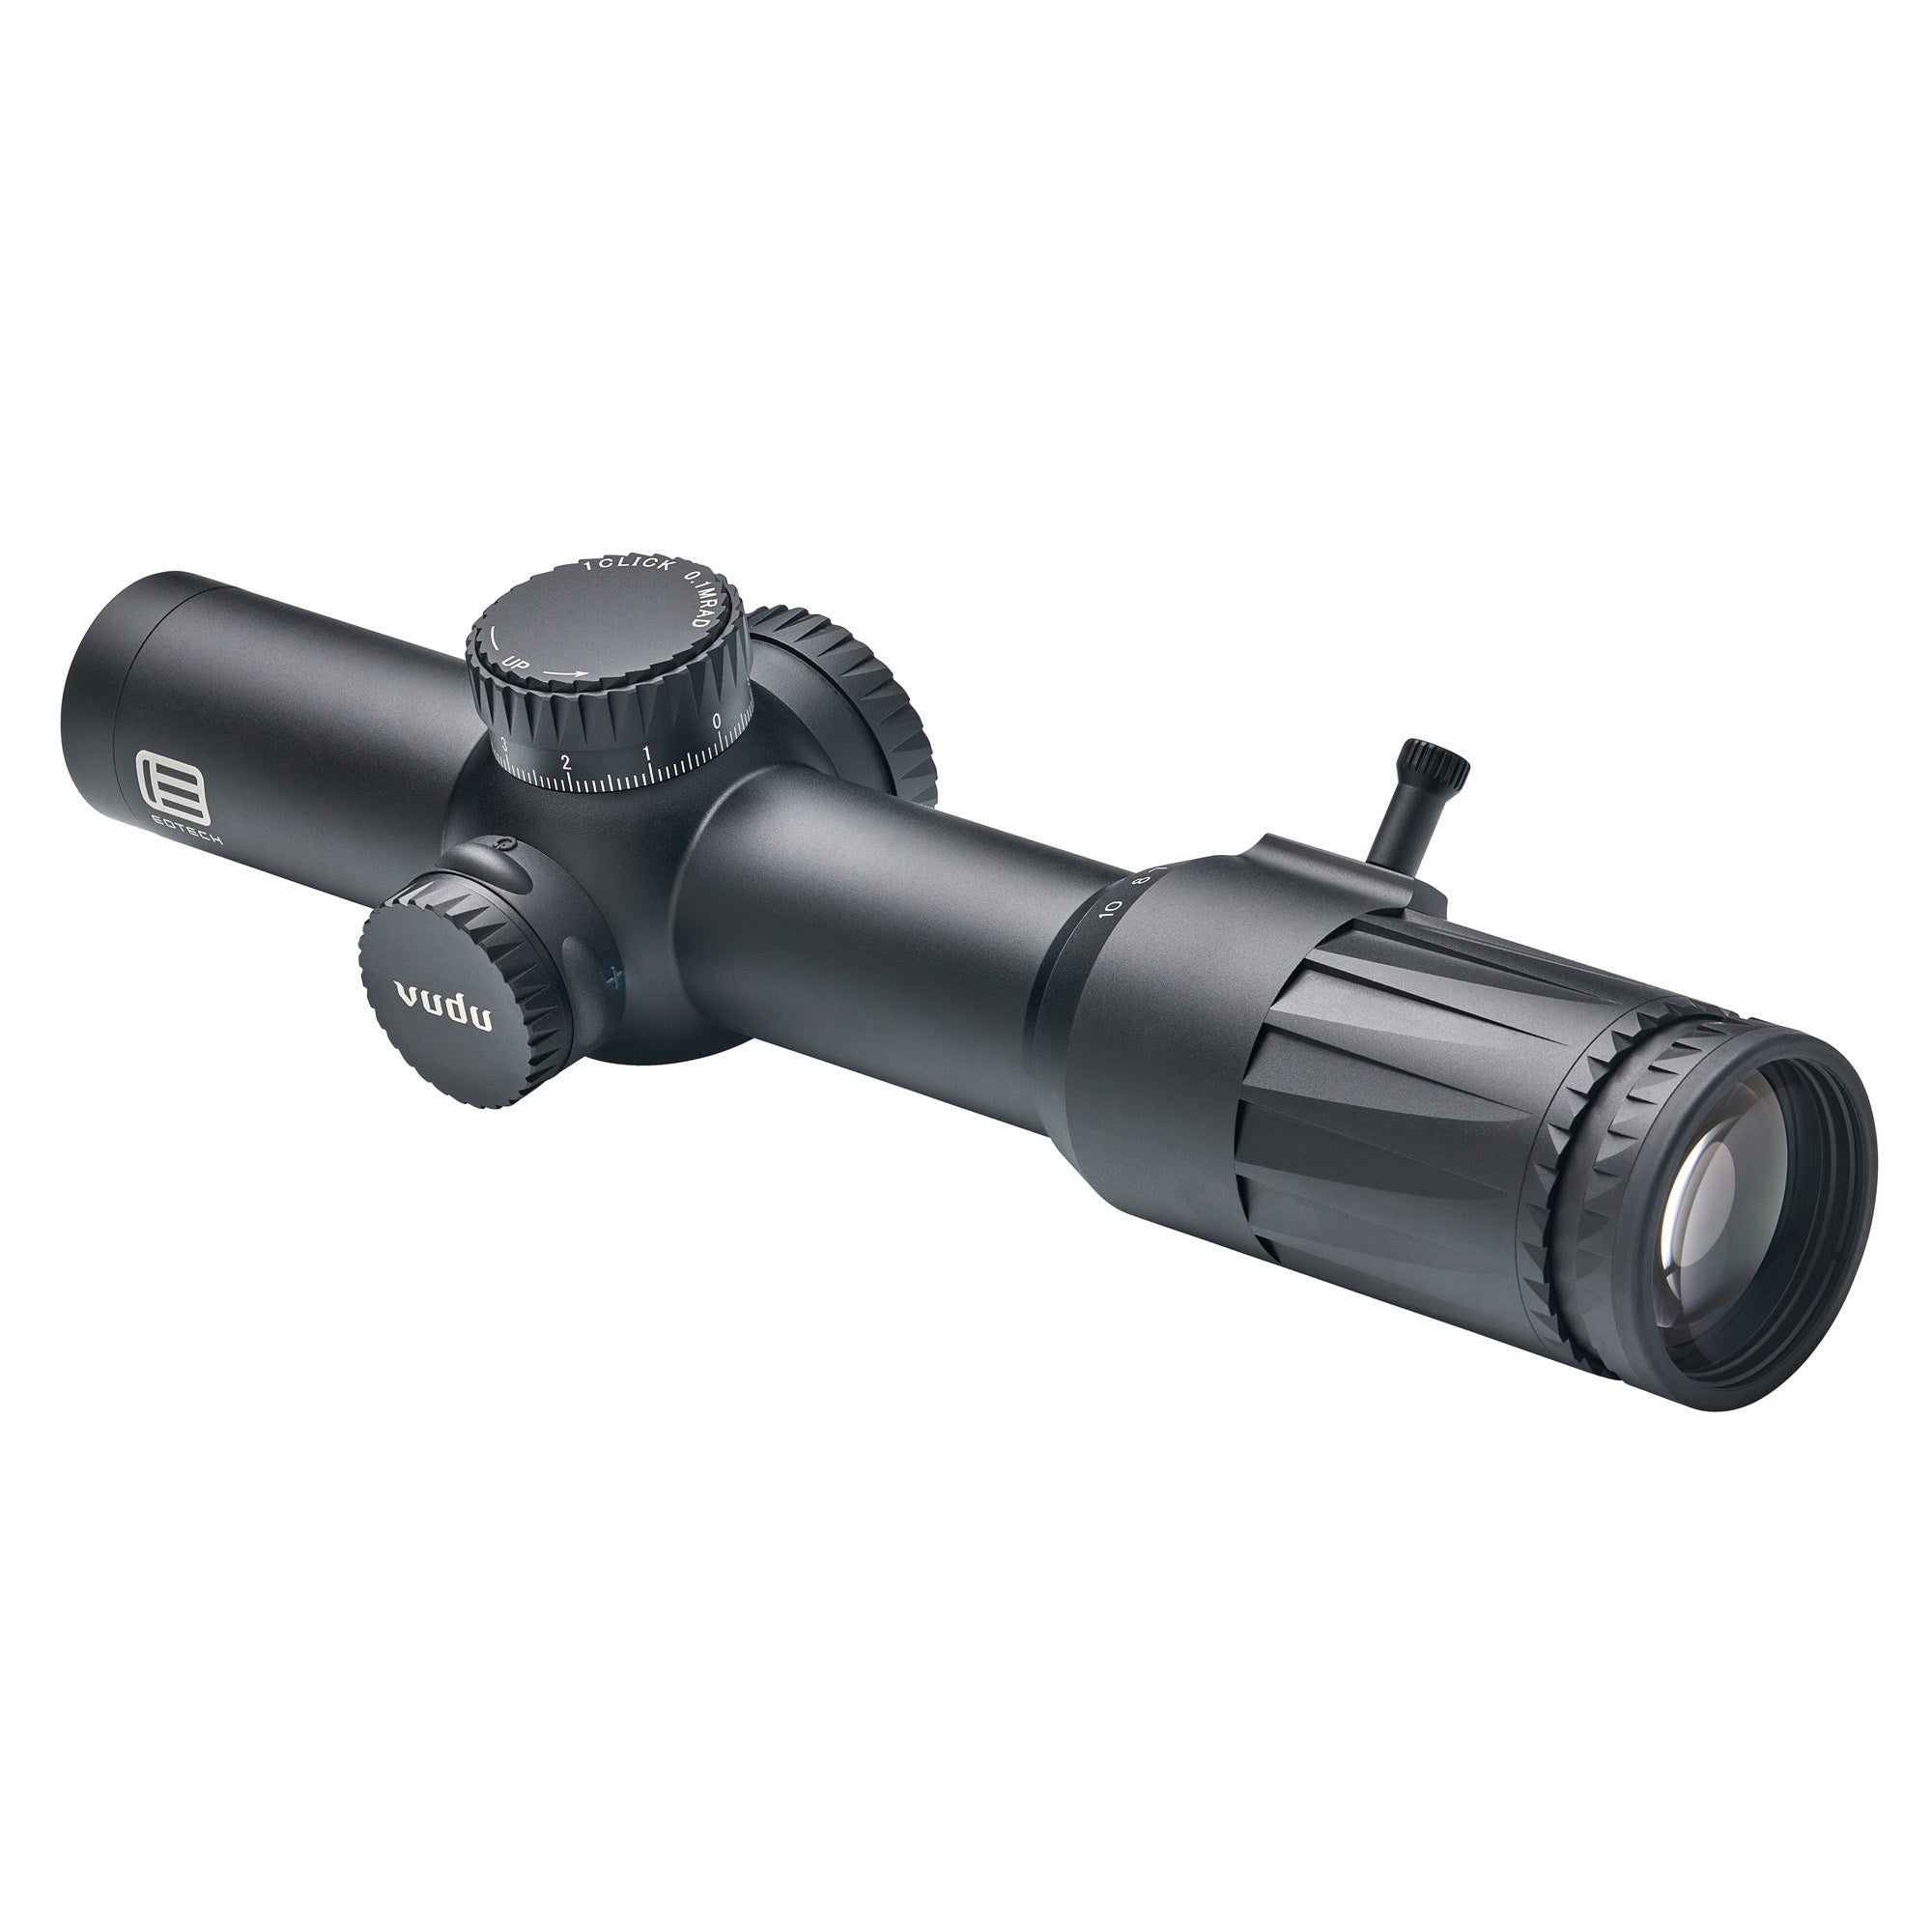 EOTech Vudu 1-10x28 Rifle Scope in Black with SR-4 Illuminated MOA Reticle, first focal plane for precise long-range accuracy